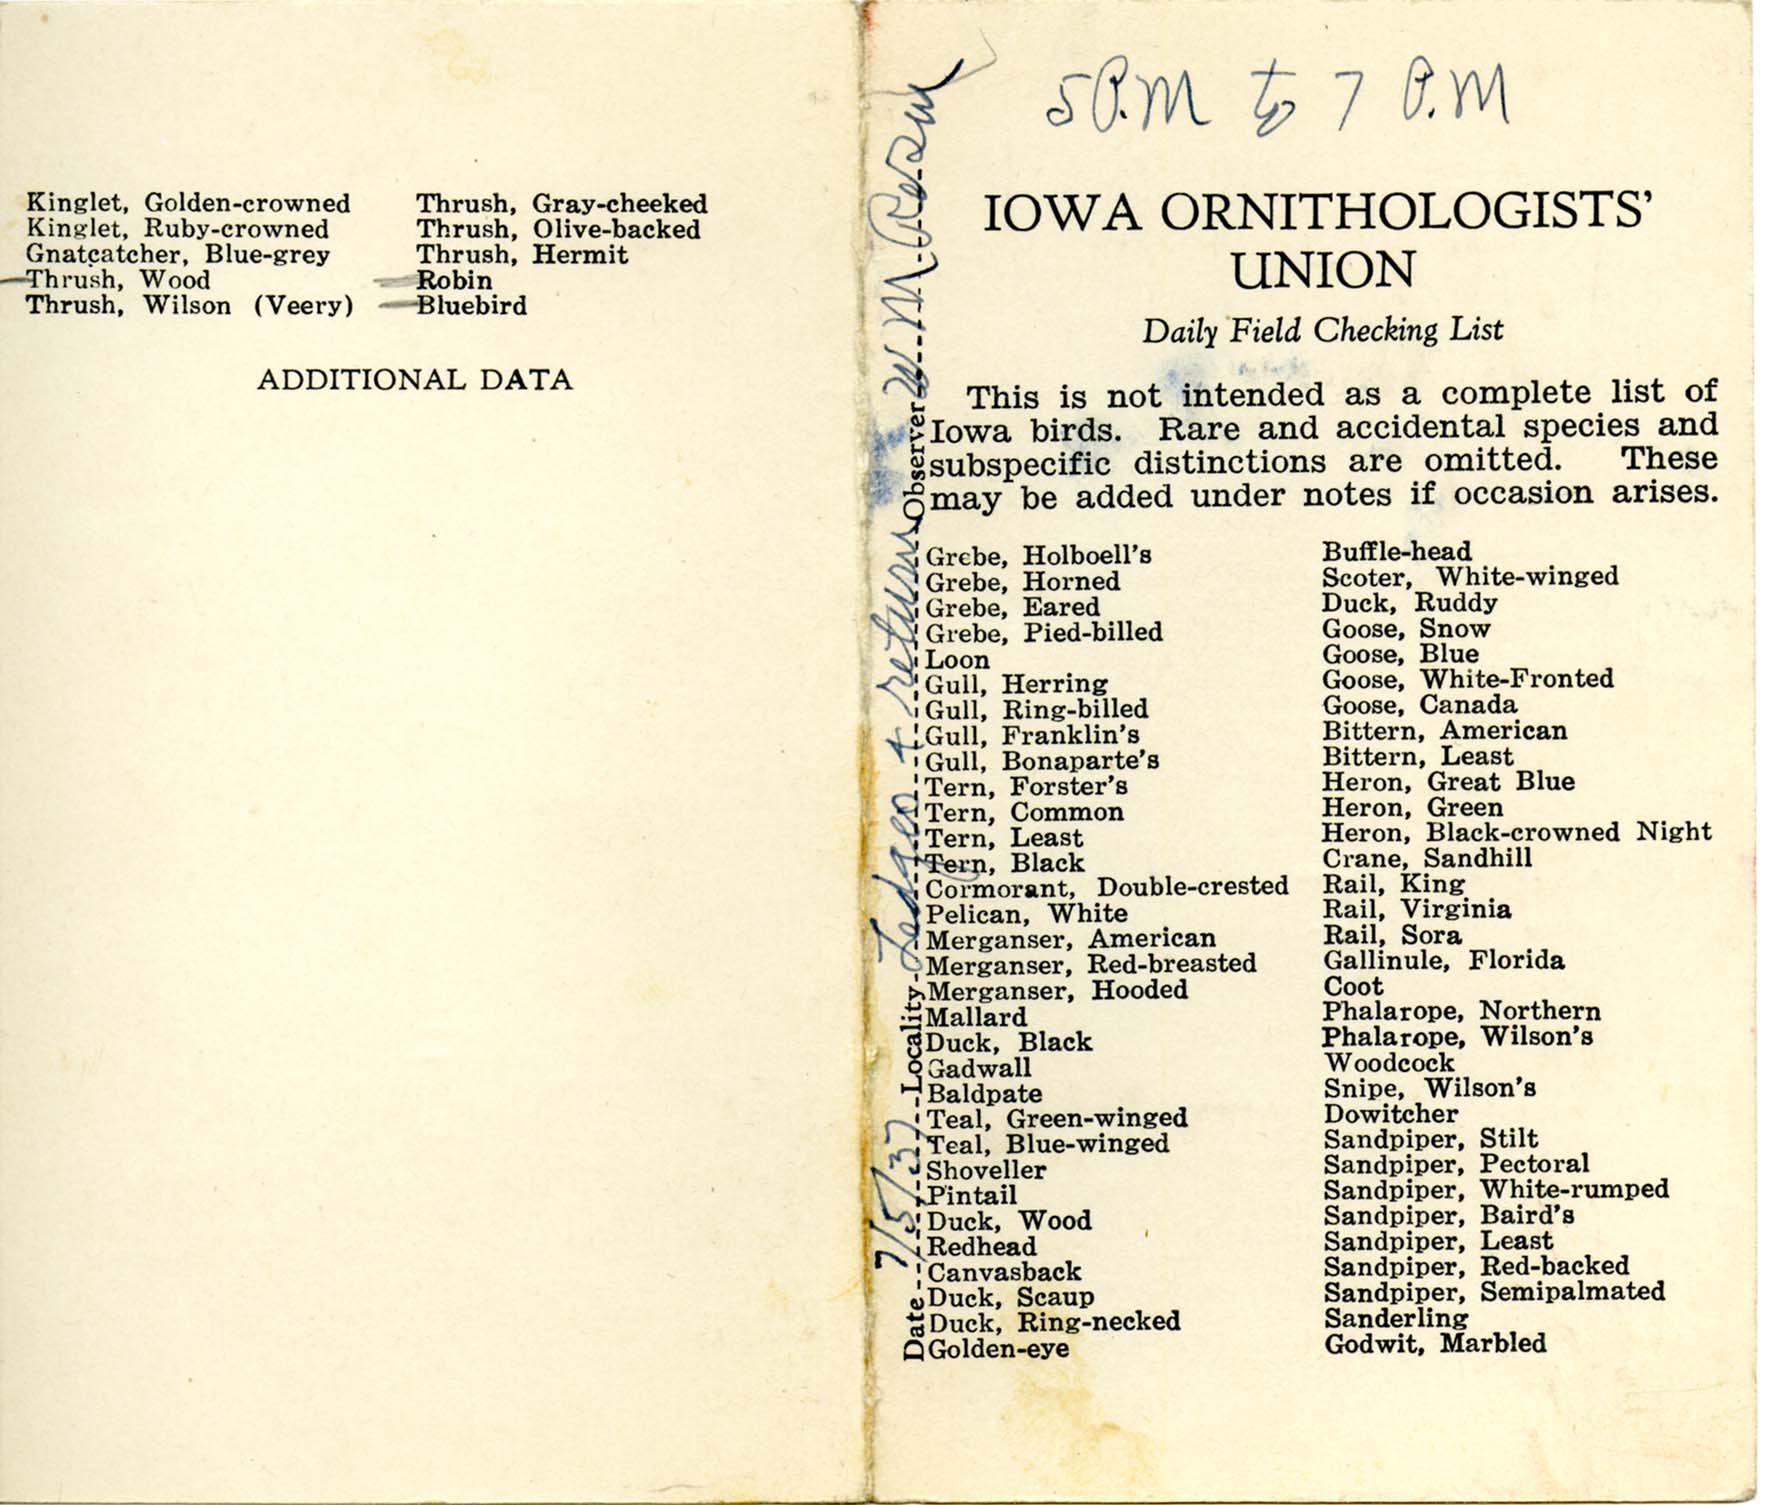 Daily field checking list by Walter Rosene, July 5, 1937